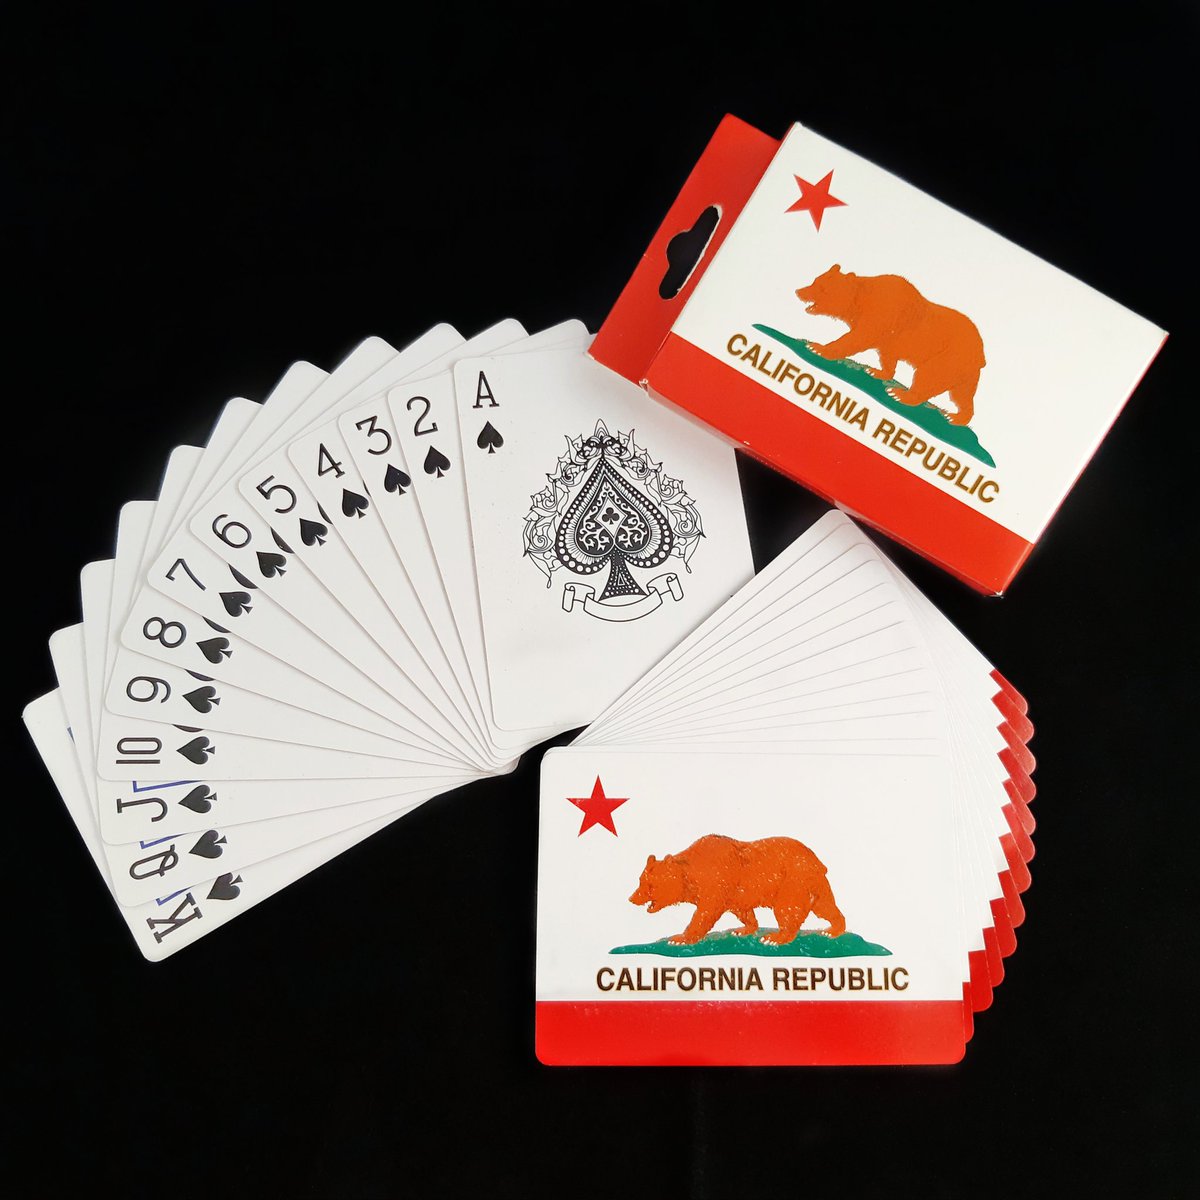 Happy National California Day! Official state flag since 1911, the California grizzly bear at the center of the flag is now extinct.
#NationalCaliforniaDay #CaliforniaDay #California #Californiaflag #playingcards #playingcardmuseum #deckofcards #playingcardcollection